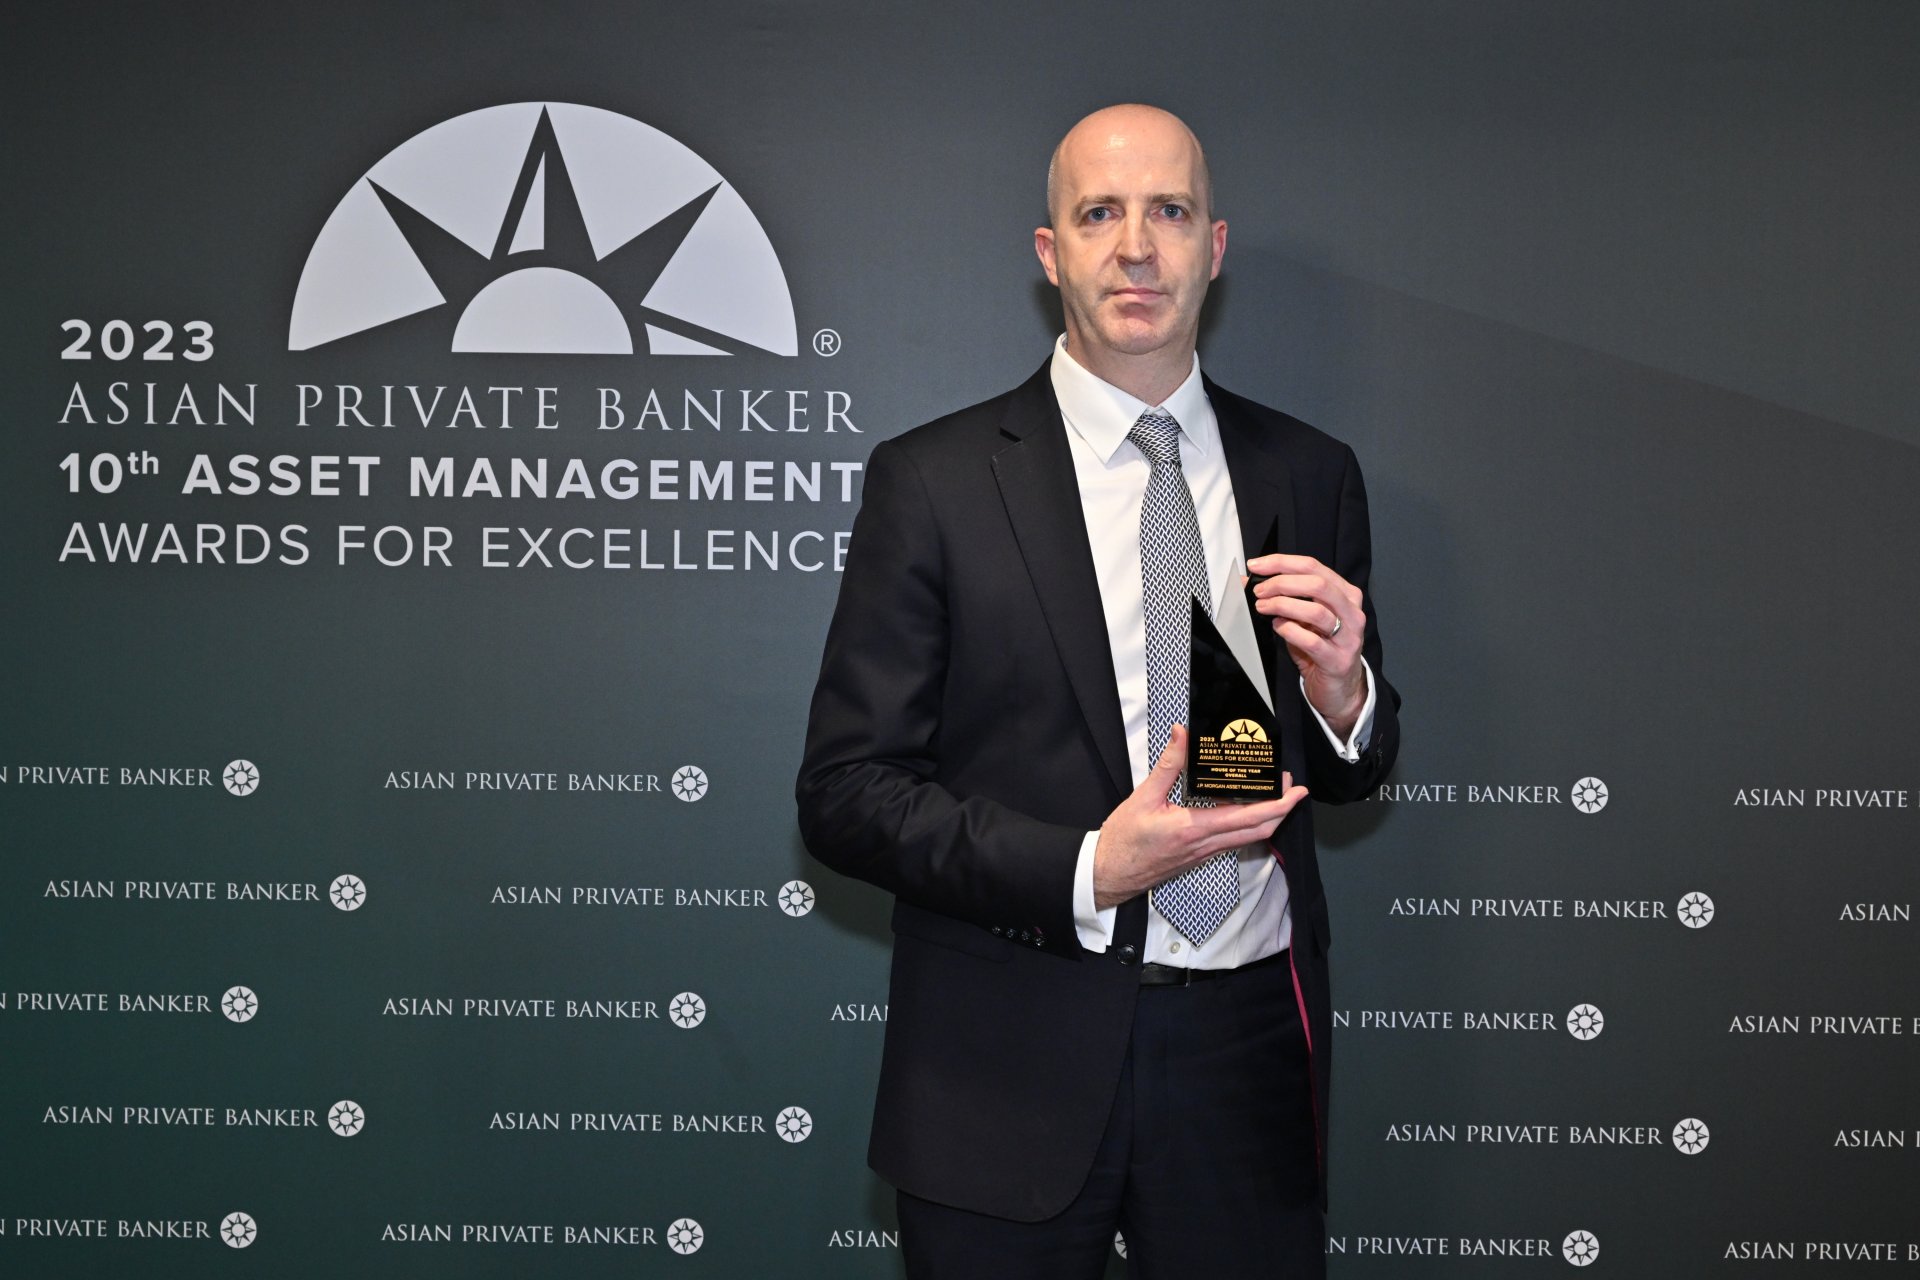 J.P. Morgan Asset Management is Asian Private Banker's House of the Year - Overall for the second year in a row. Accepting the award is Dan Watkins, Chief Executive Officer, Asia Pacific